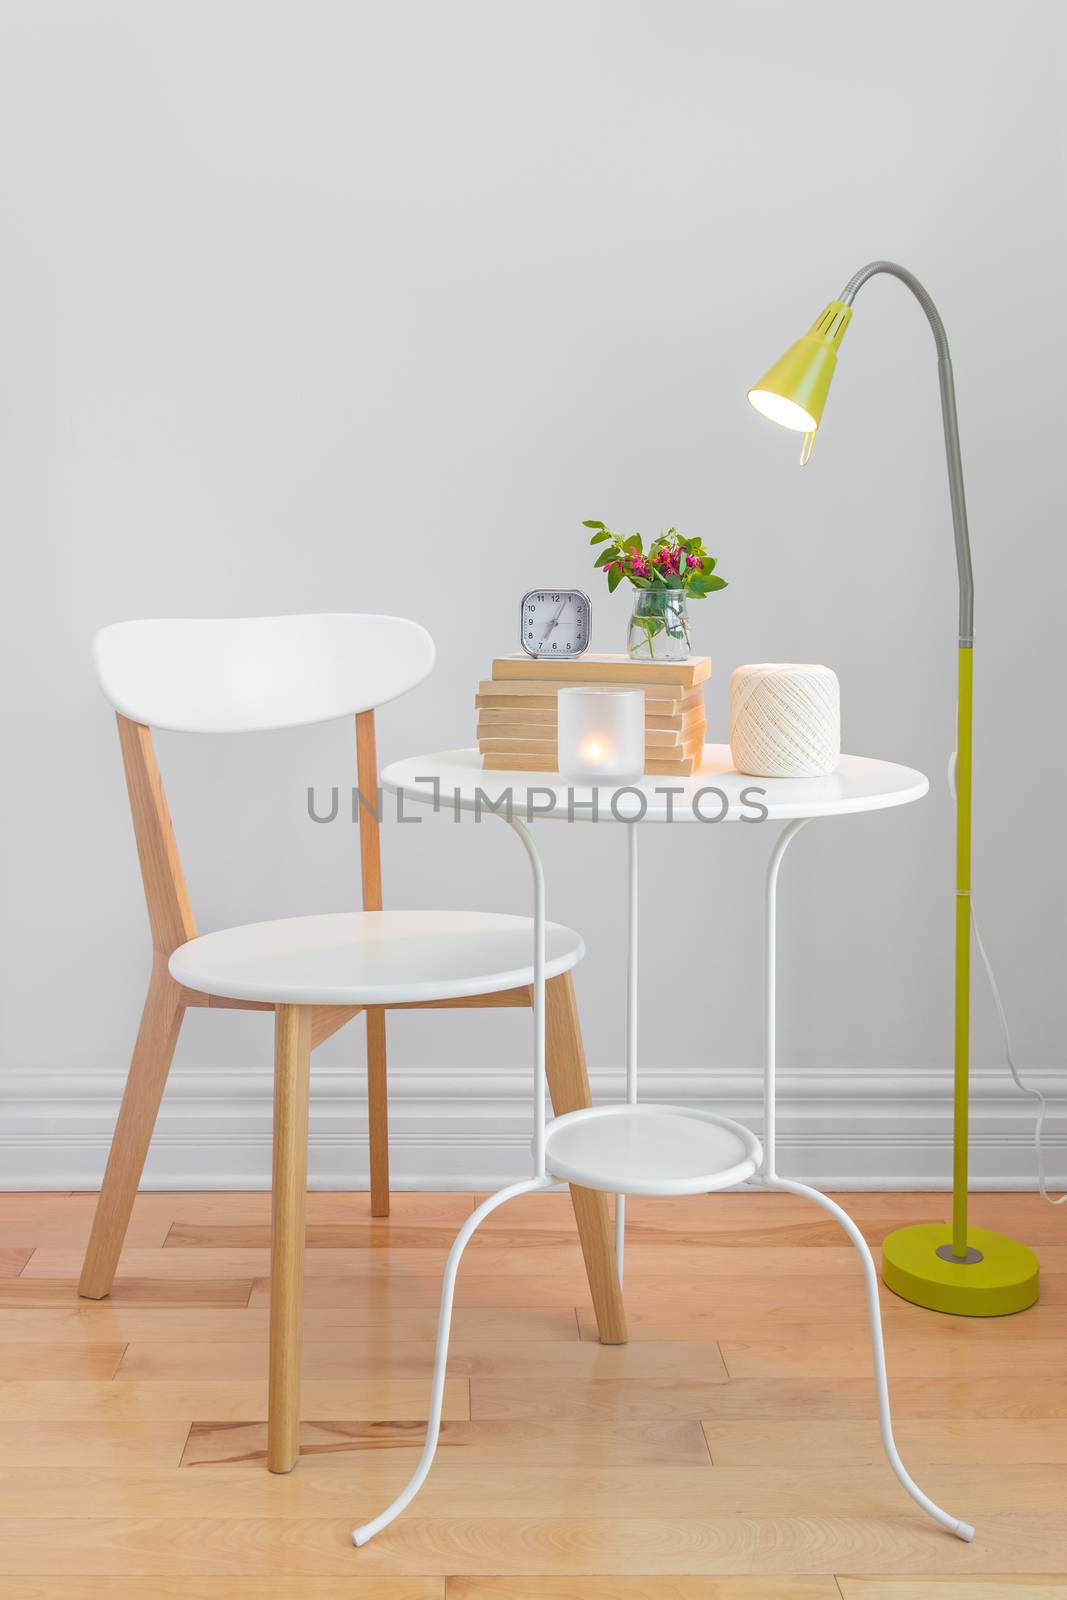 Elegant home decor with modern furniture and floor lamp.